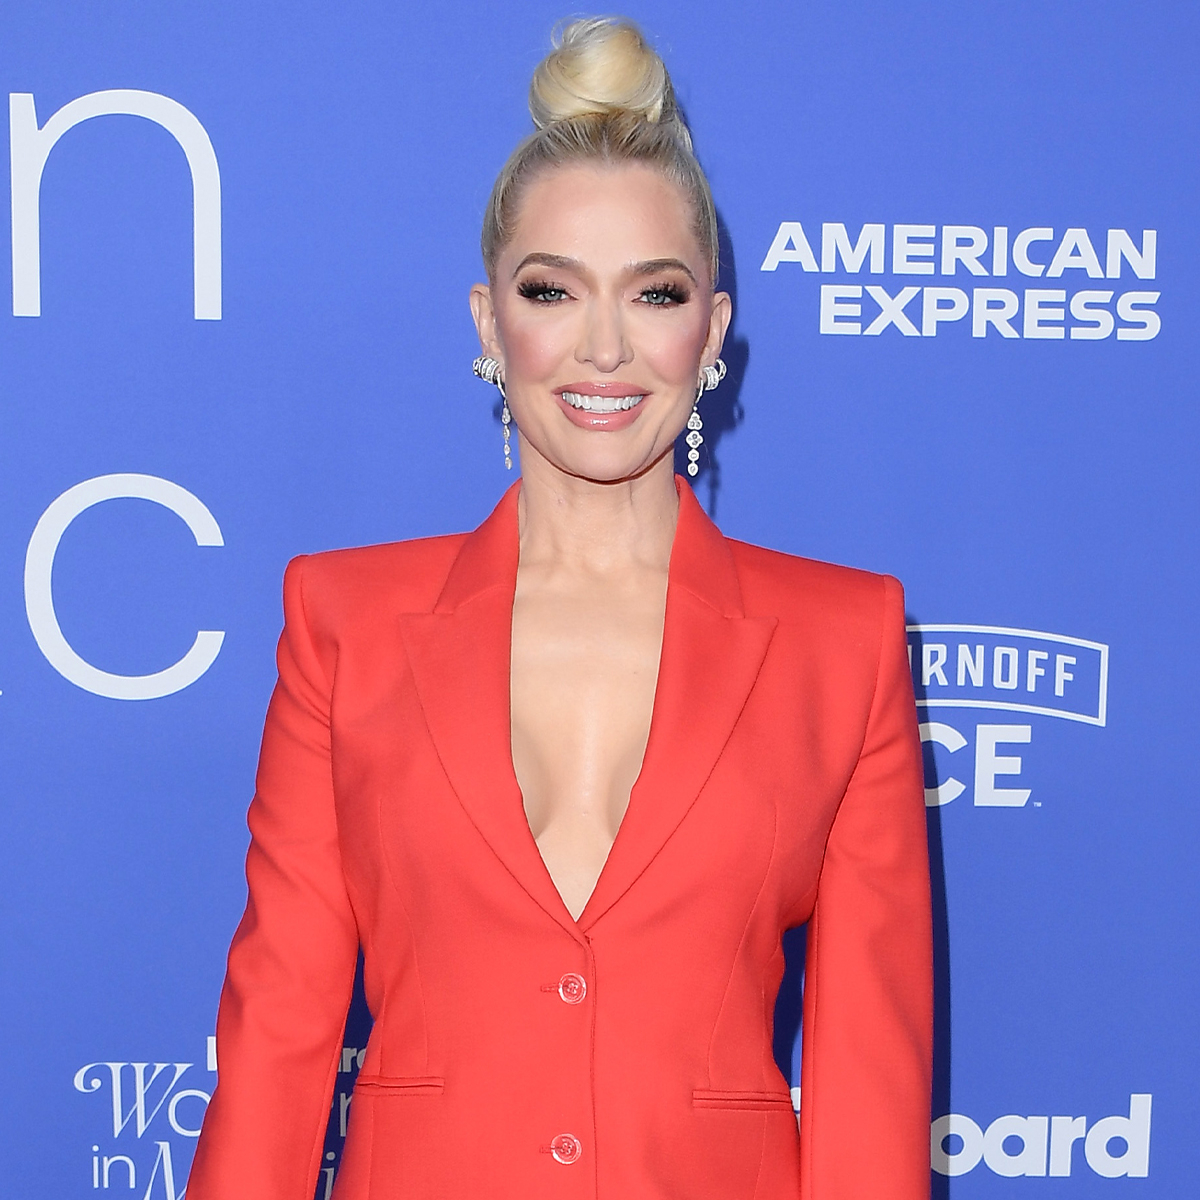 Did RHOBH’s Erika Jayne Just Announce a Las Vegas Show? See Her Big Career News – E! Online